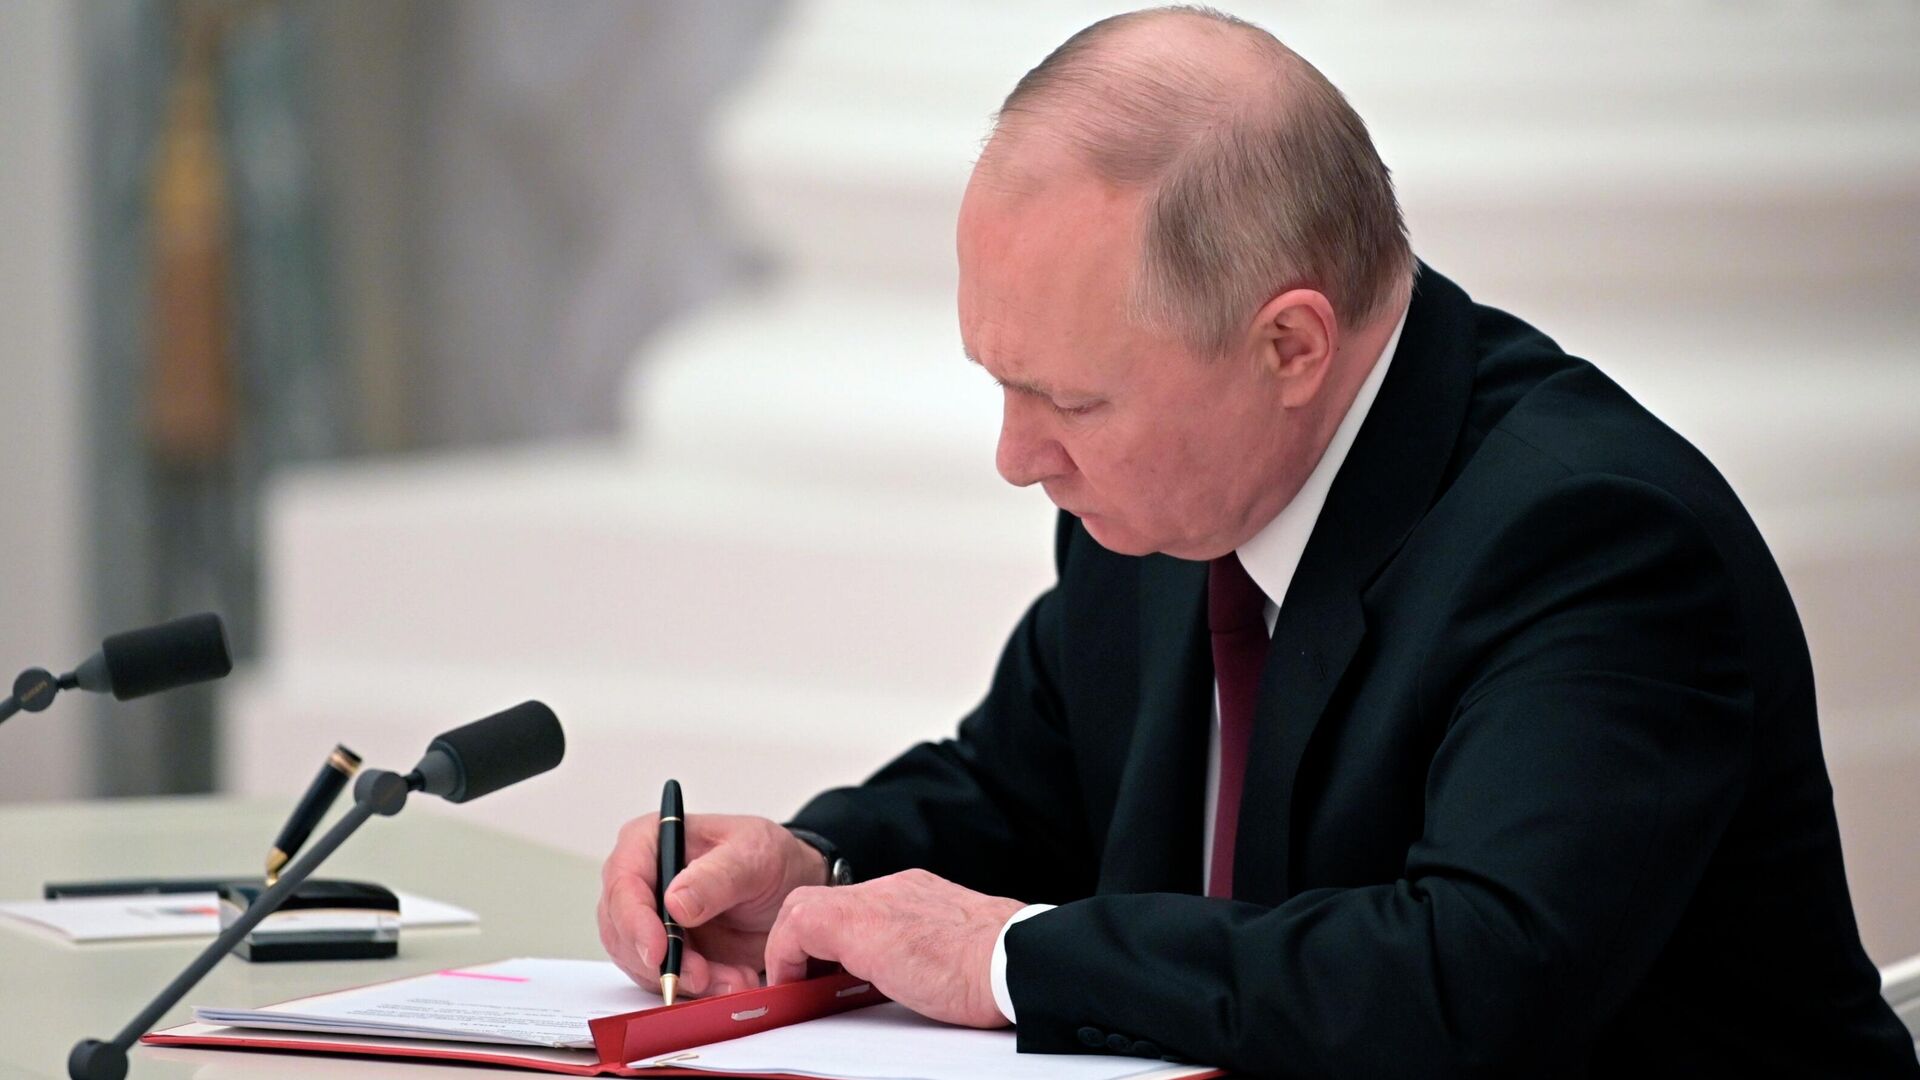 Russian President Vladimir Putin signs a document recognizing the independence of separatist regions in eastern Ukraine in the Kremlin in Moscow, Russia, Monday, Feb. 21, 2022. Russia's Putin has recognized the independence of separatist regions in eastern Ukraine, raising tensions with West. - Sputnik International, 1920, 02.03.2022